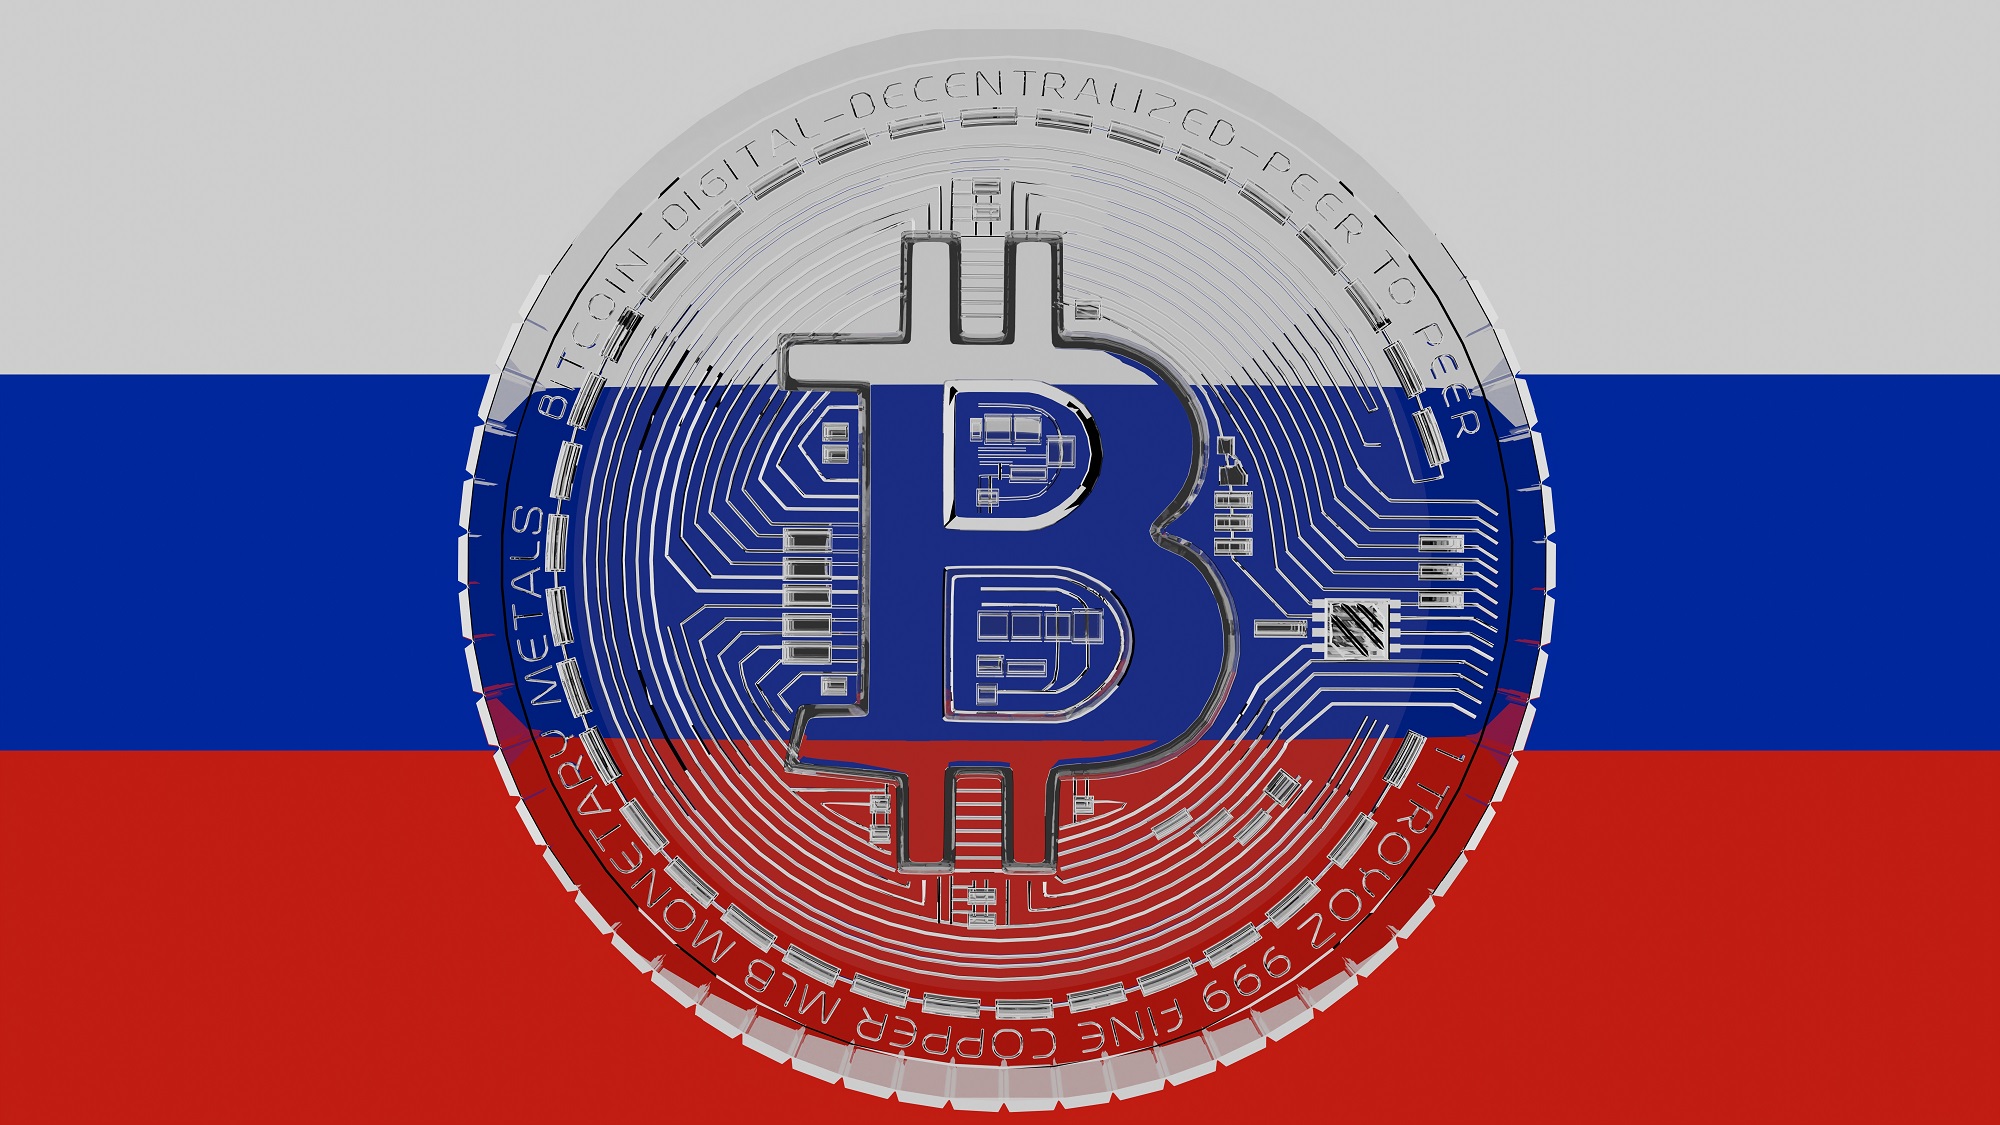 A transparent token featuring the Bitcoin logo in the center in front of the flag of Russia.